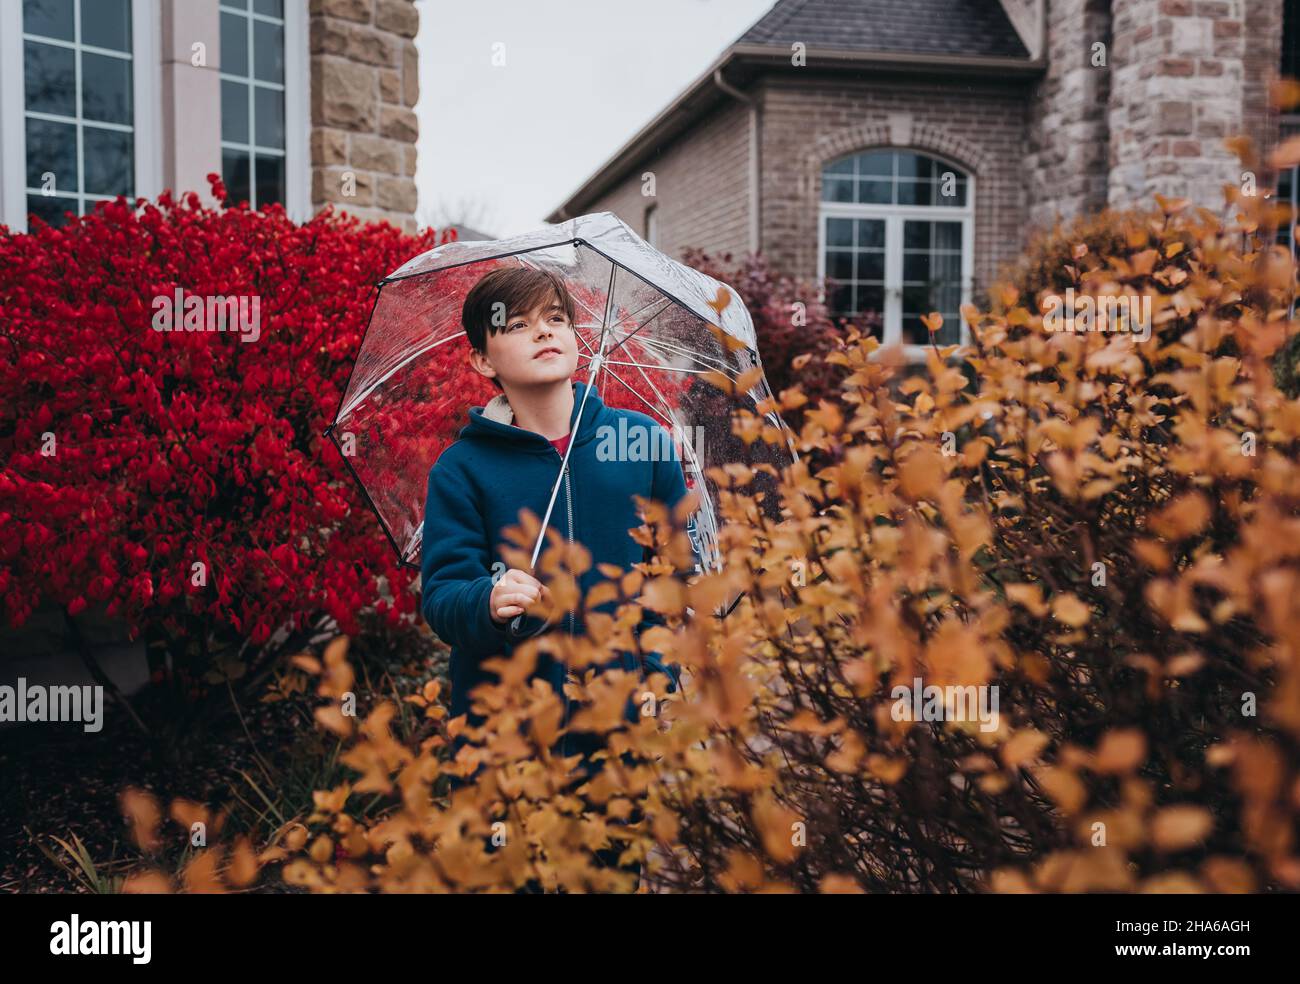 Boy holding umbrella in front of house on a rainy fall day. Stock Photo